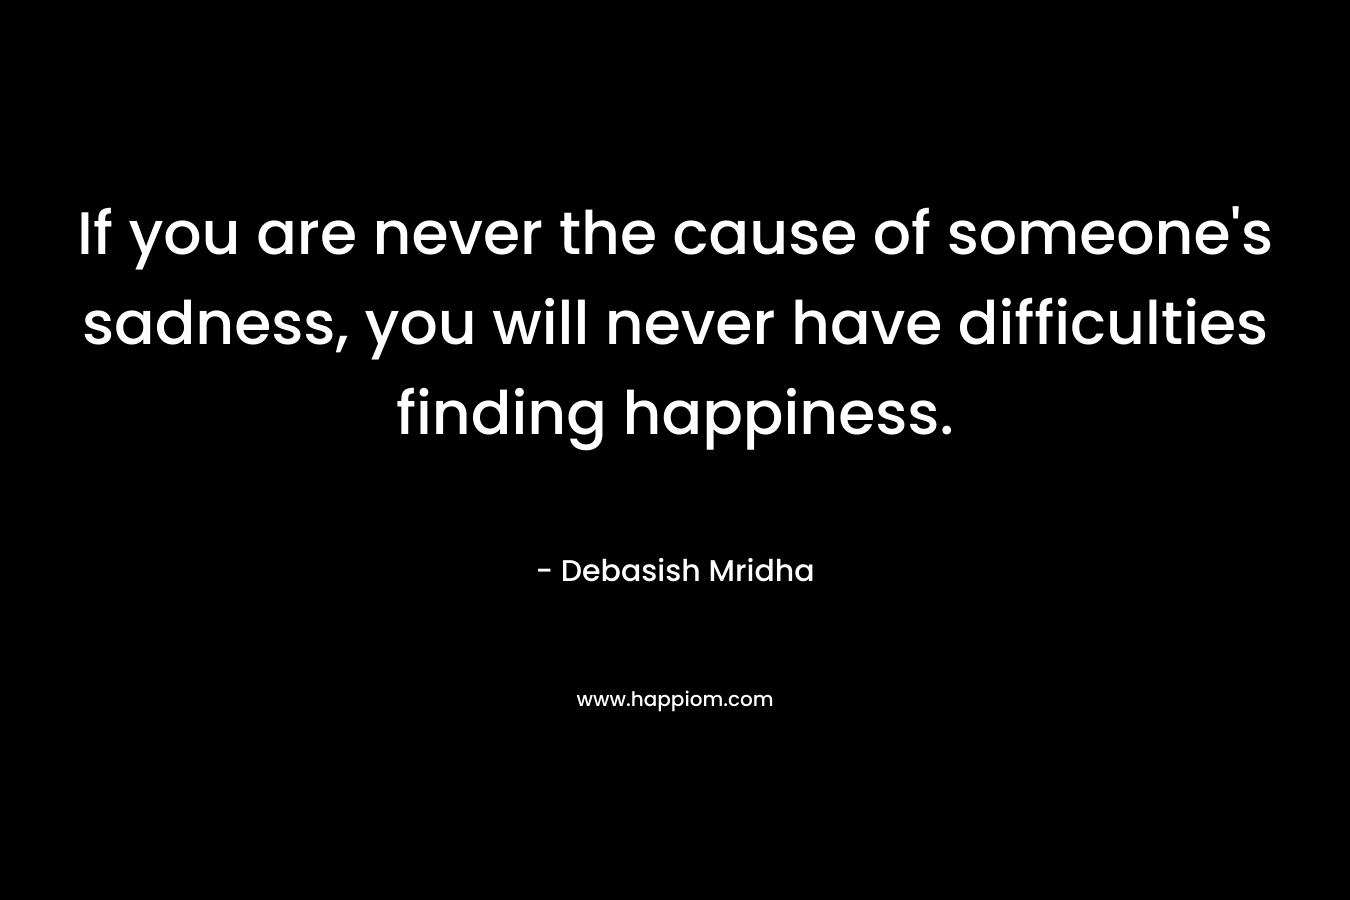 If you are never the cause of someone's sadness, you will never have difficulties finding happiness.